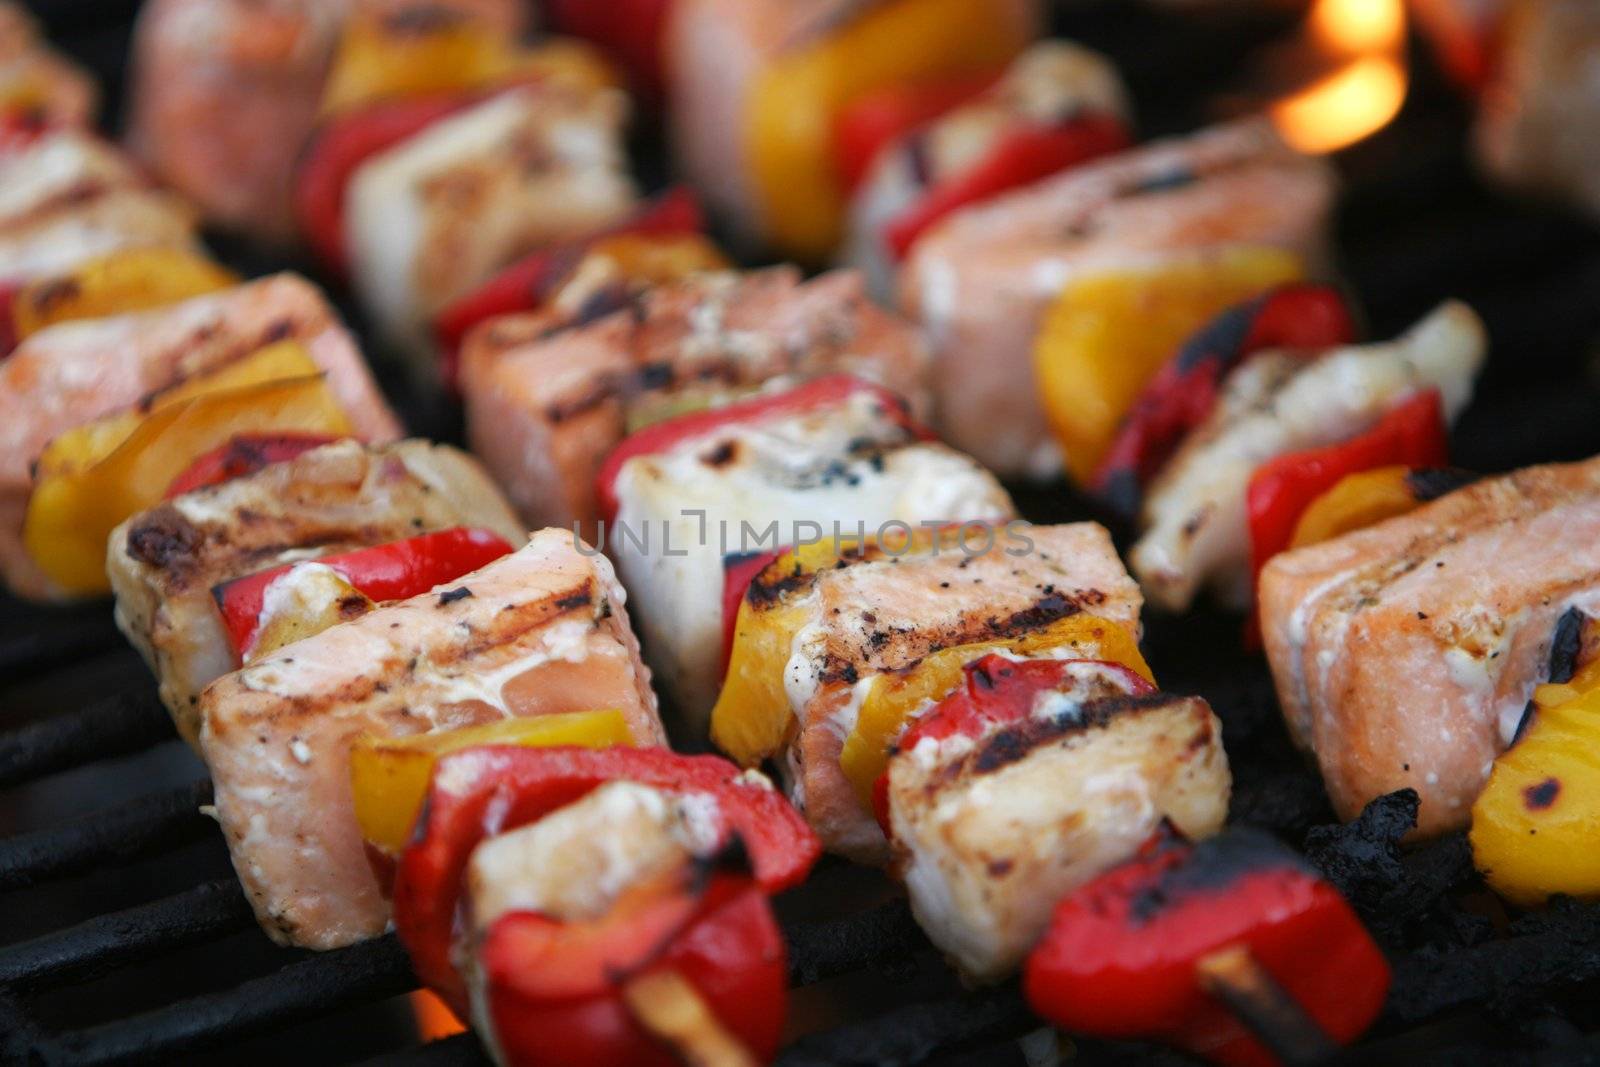 fresh fish on grilling sticks, salmon and halibut with red and yellow pepper being barbecued, very delicious looking